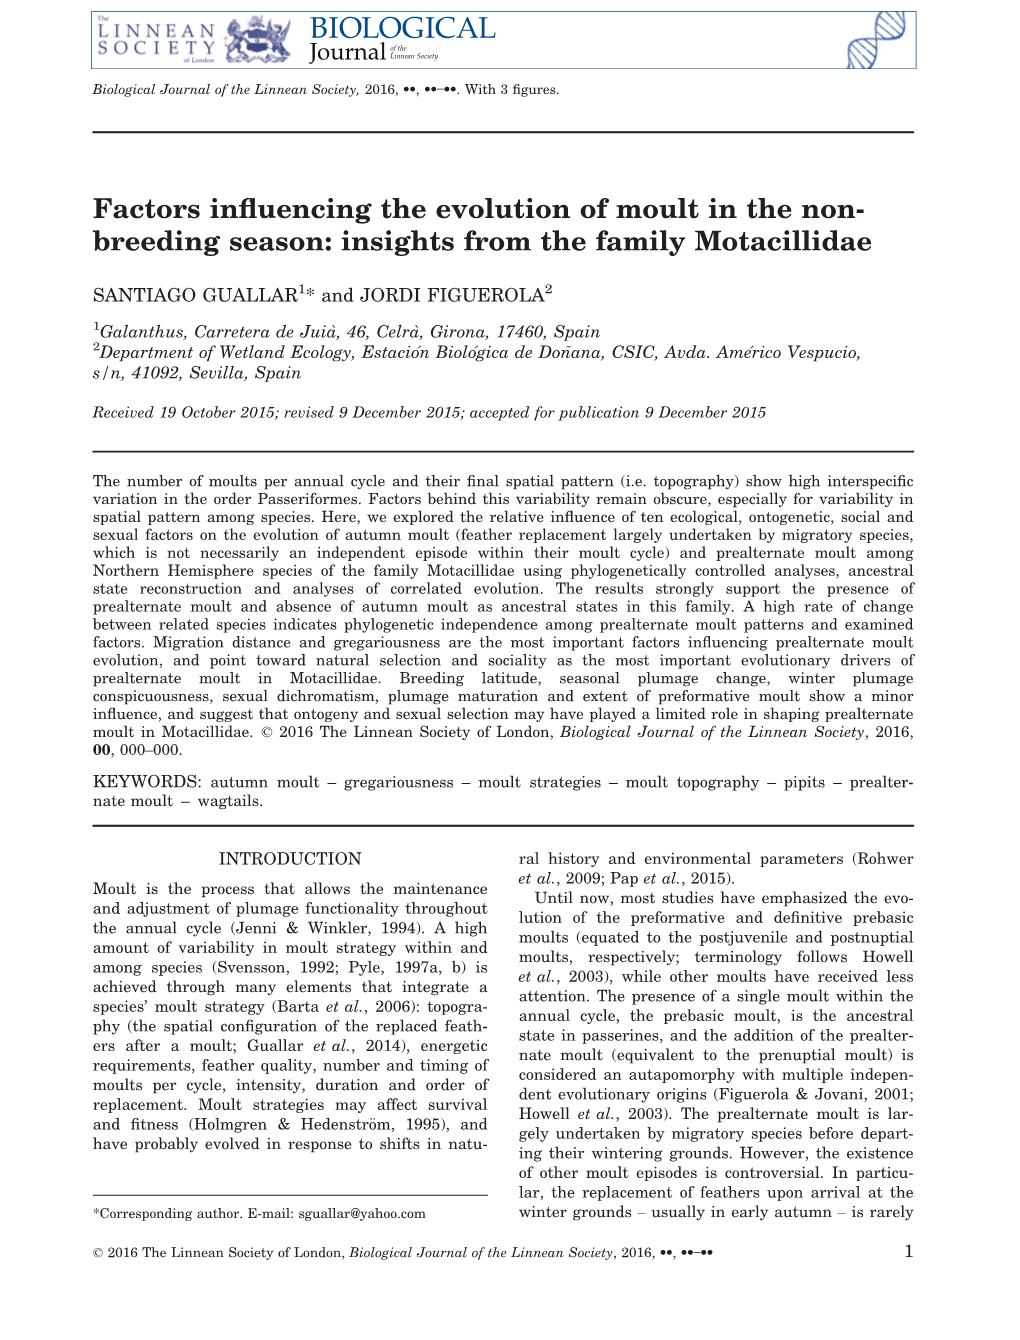 Factors Influencing the Evolution of Moult in the Non- Breeding Season